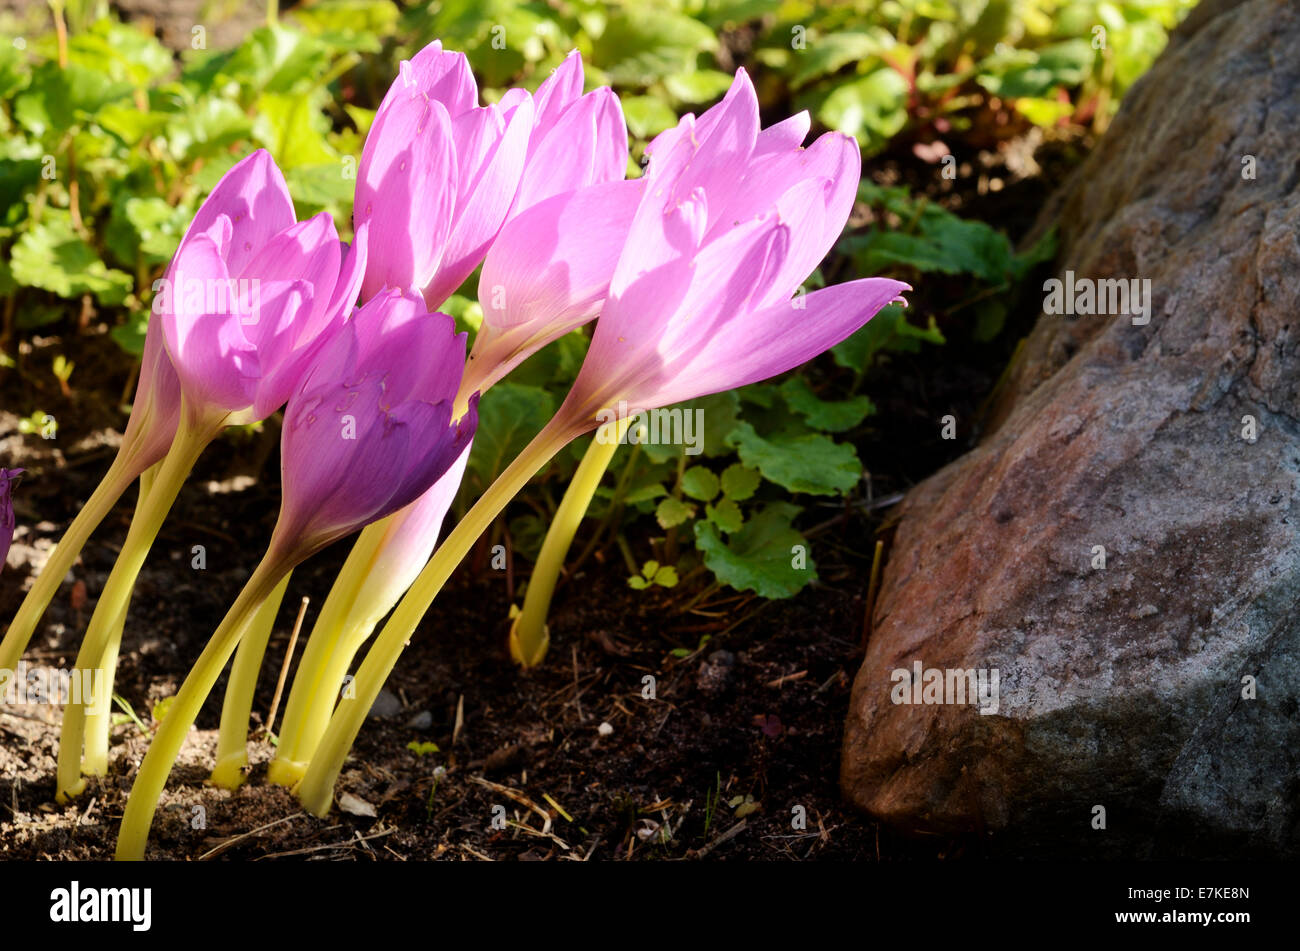 sunlit colchicum in the flowerbed next to a stone Stock Photo